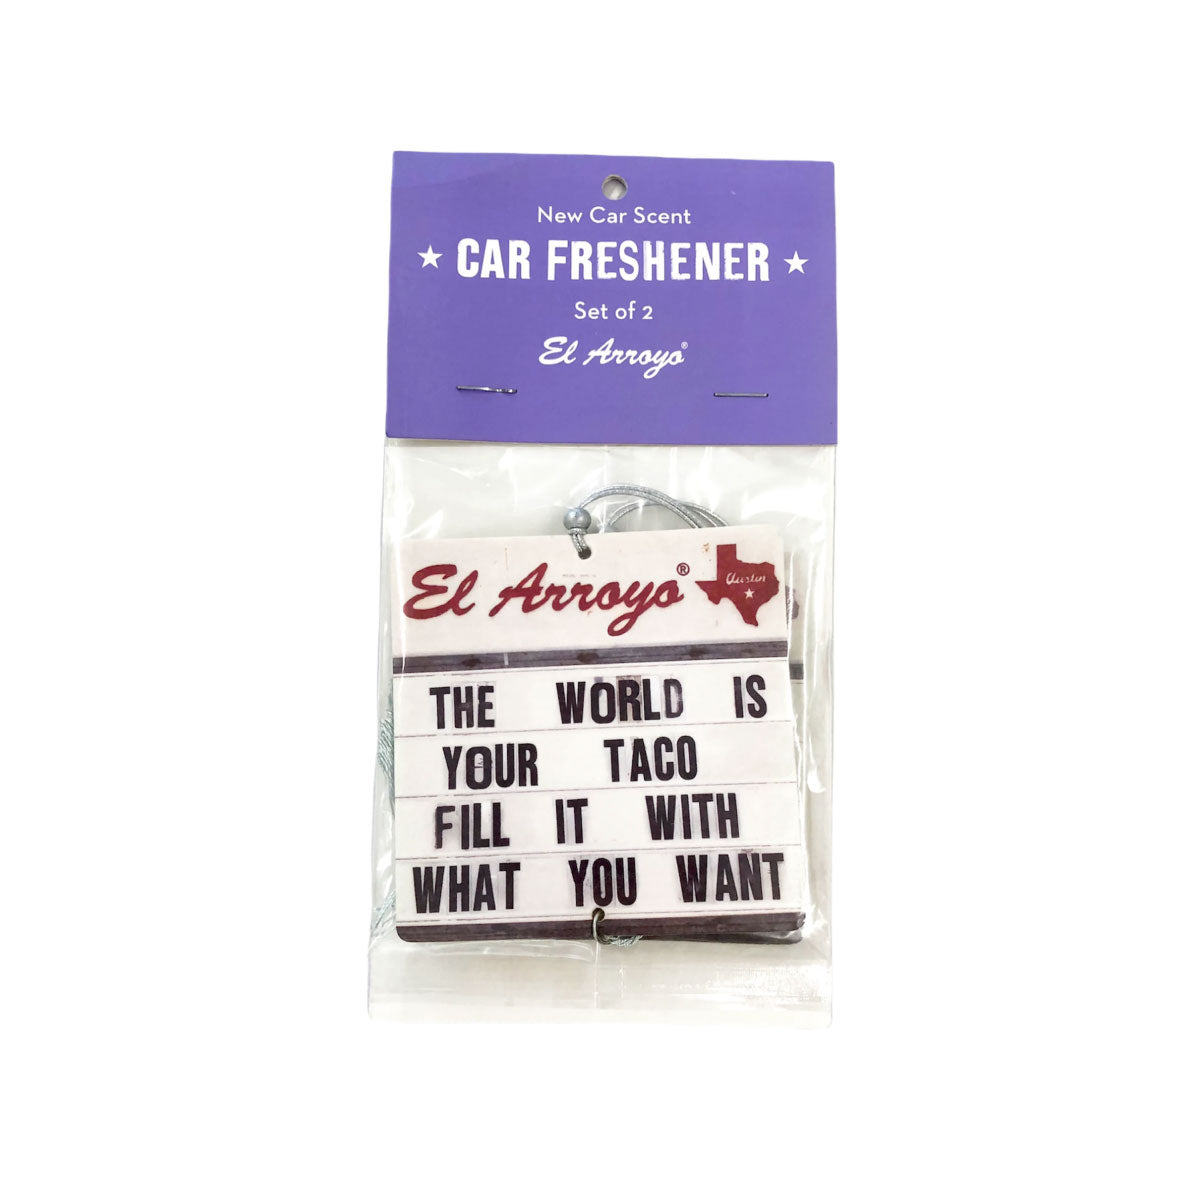 El Arroyo Car Fresheners - The World is Your Taco